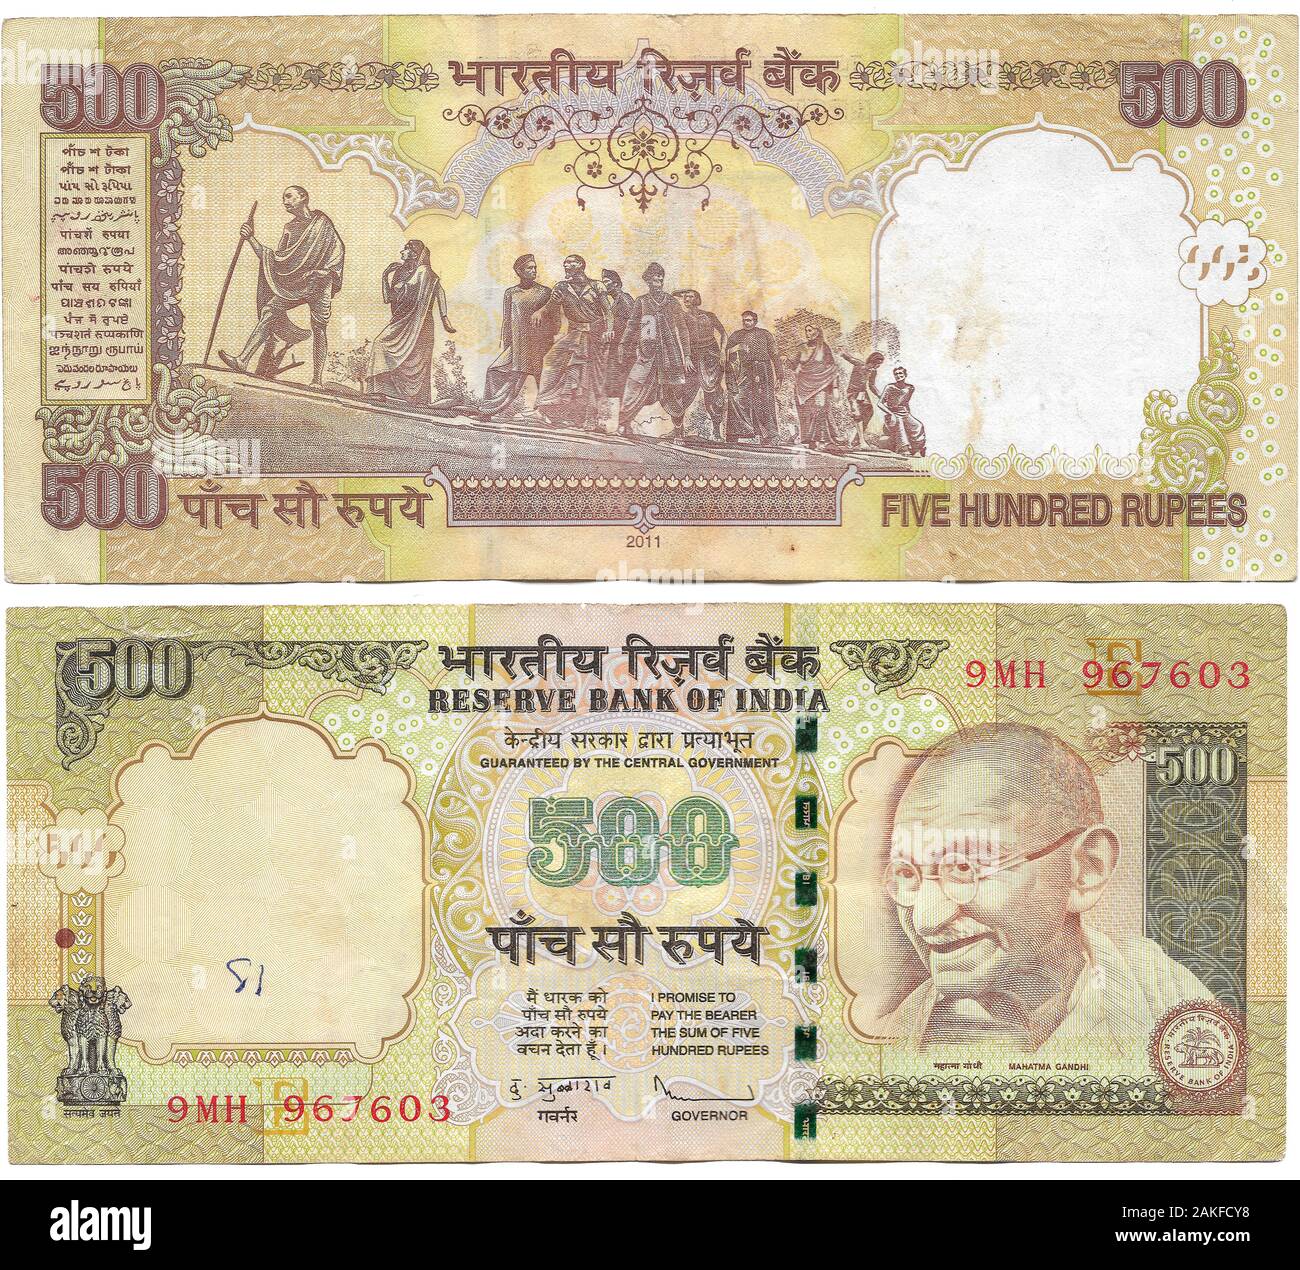 India, Mahatma Gandhi, on the face of a Five Hundred Rupee Bank Note from 2011 Stock Photo